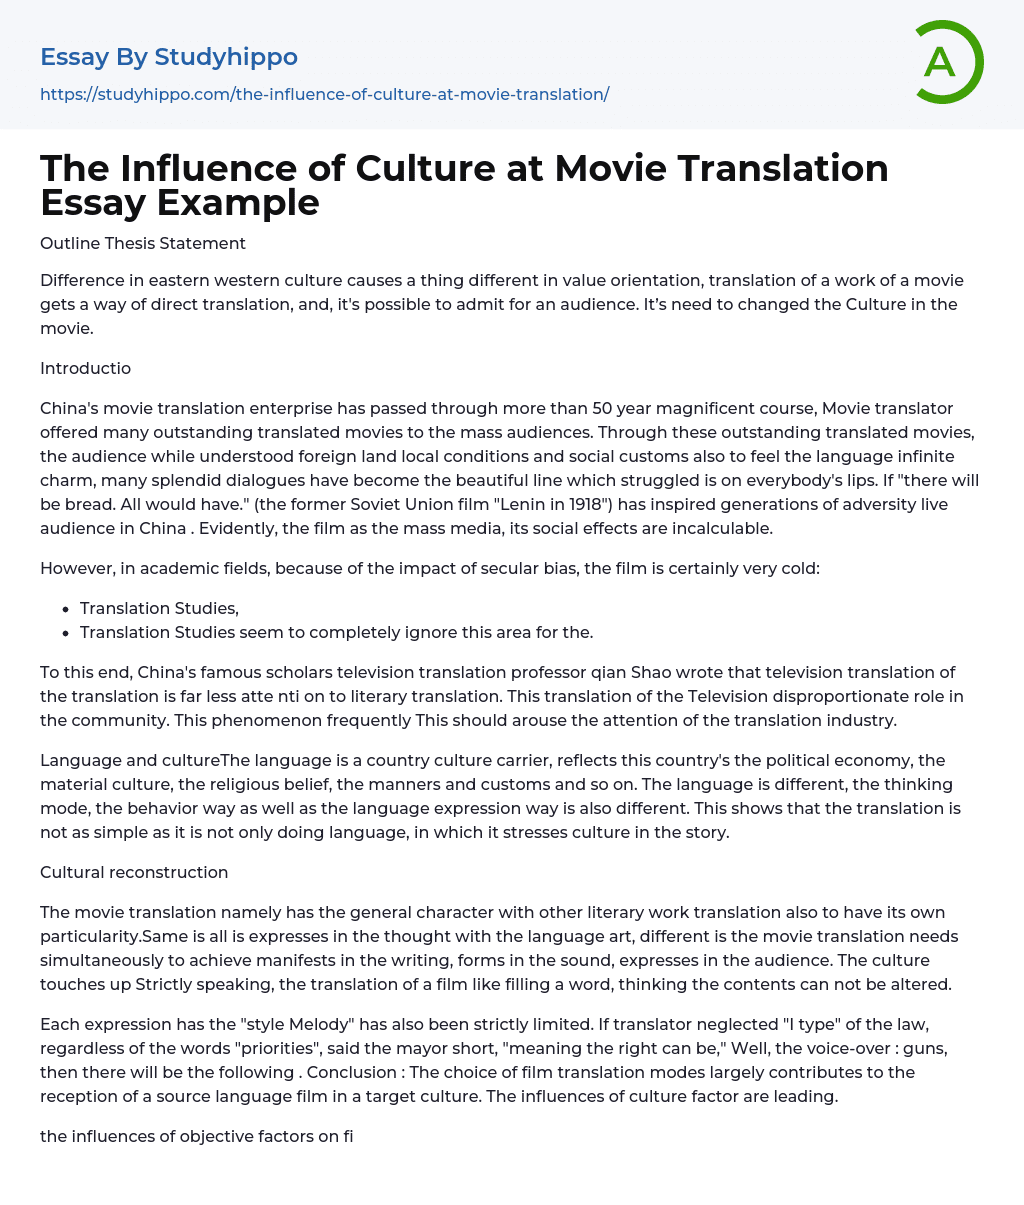 The Influence of Culture at Movie Translation Essay Example